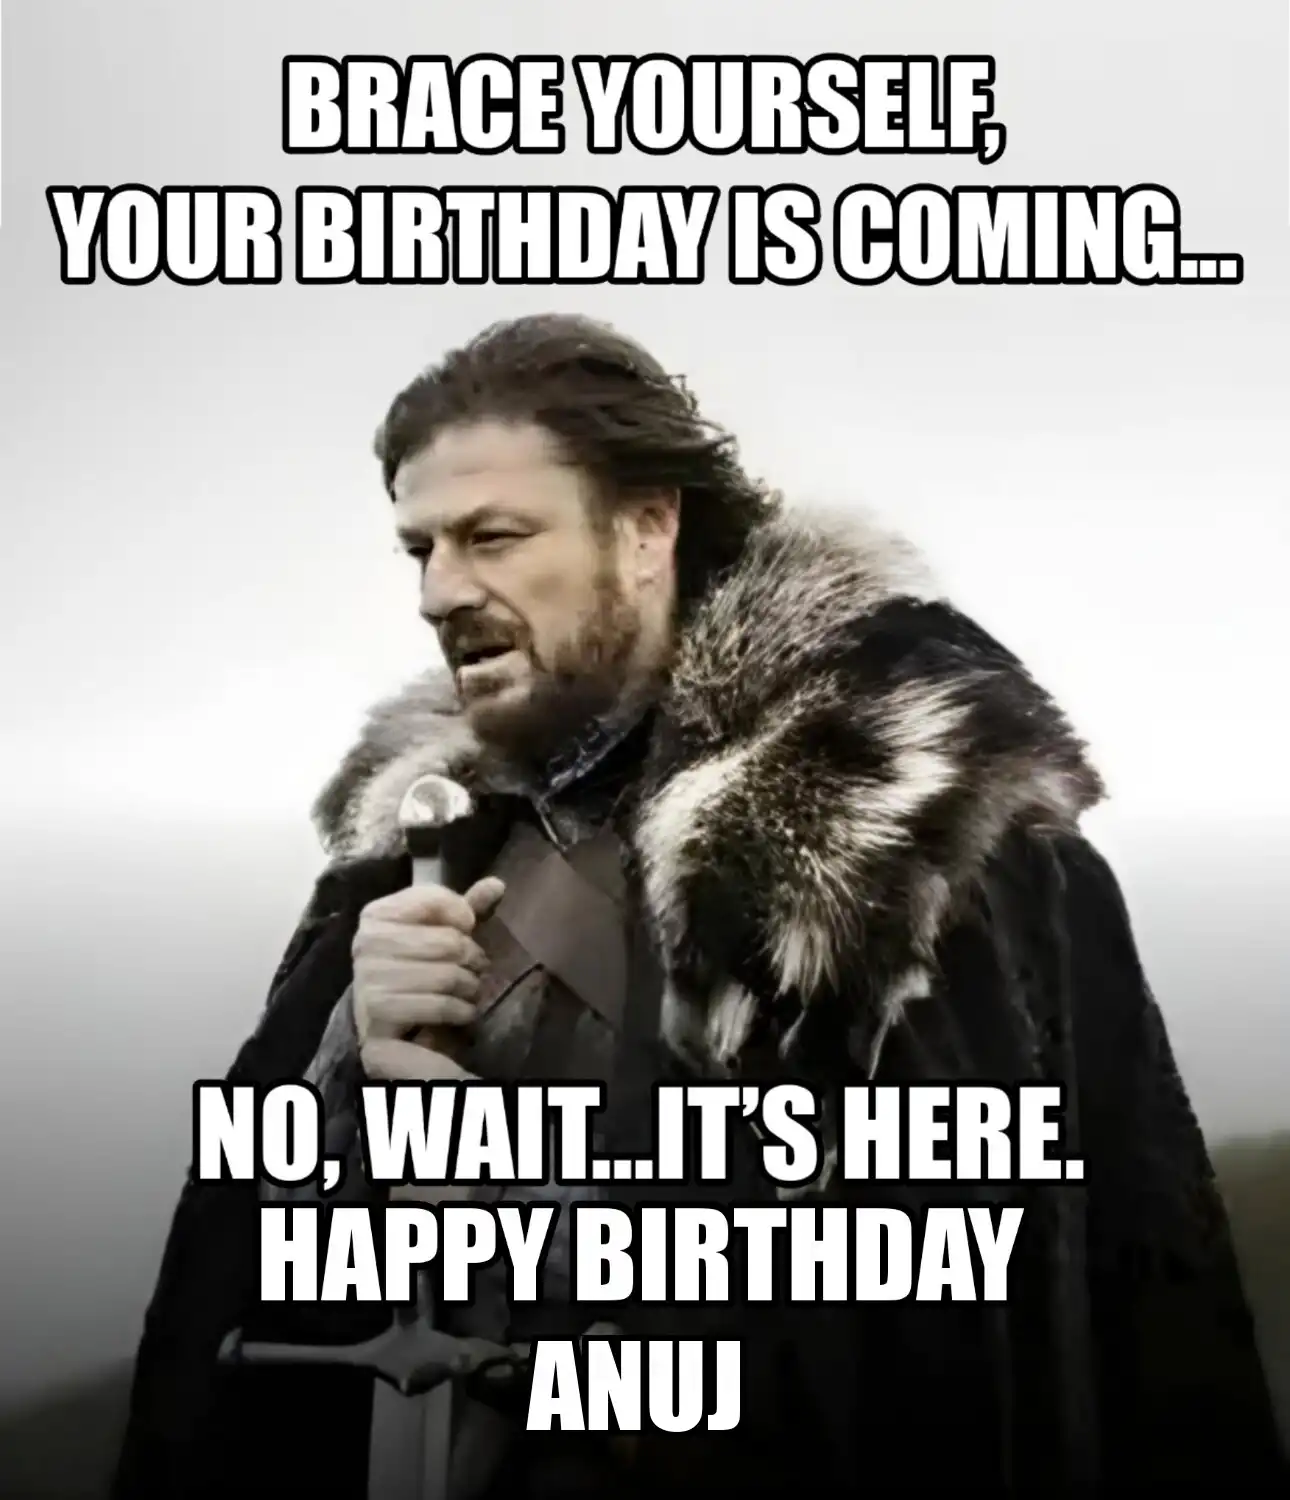 Happy Birthday Anuj Brace Yourself Your Birthday Is Coming Meme